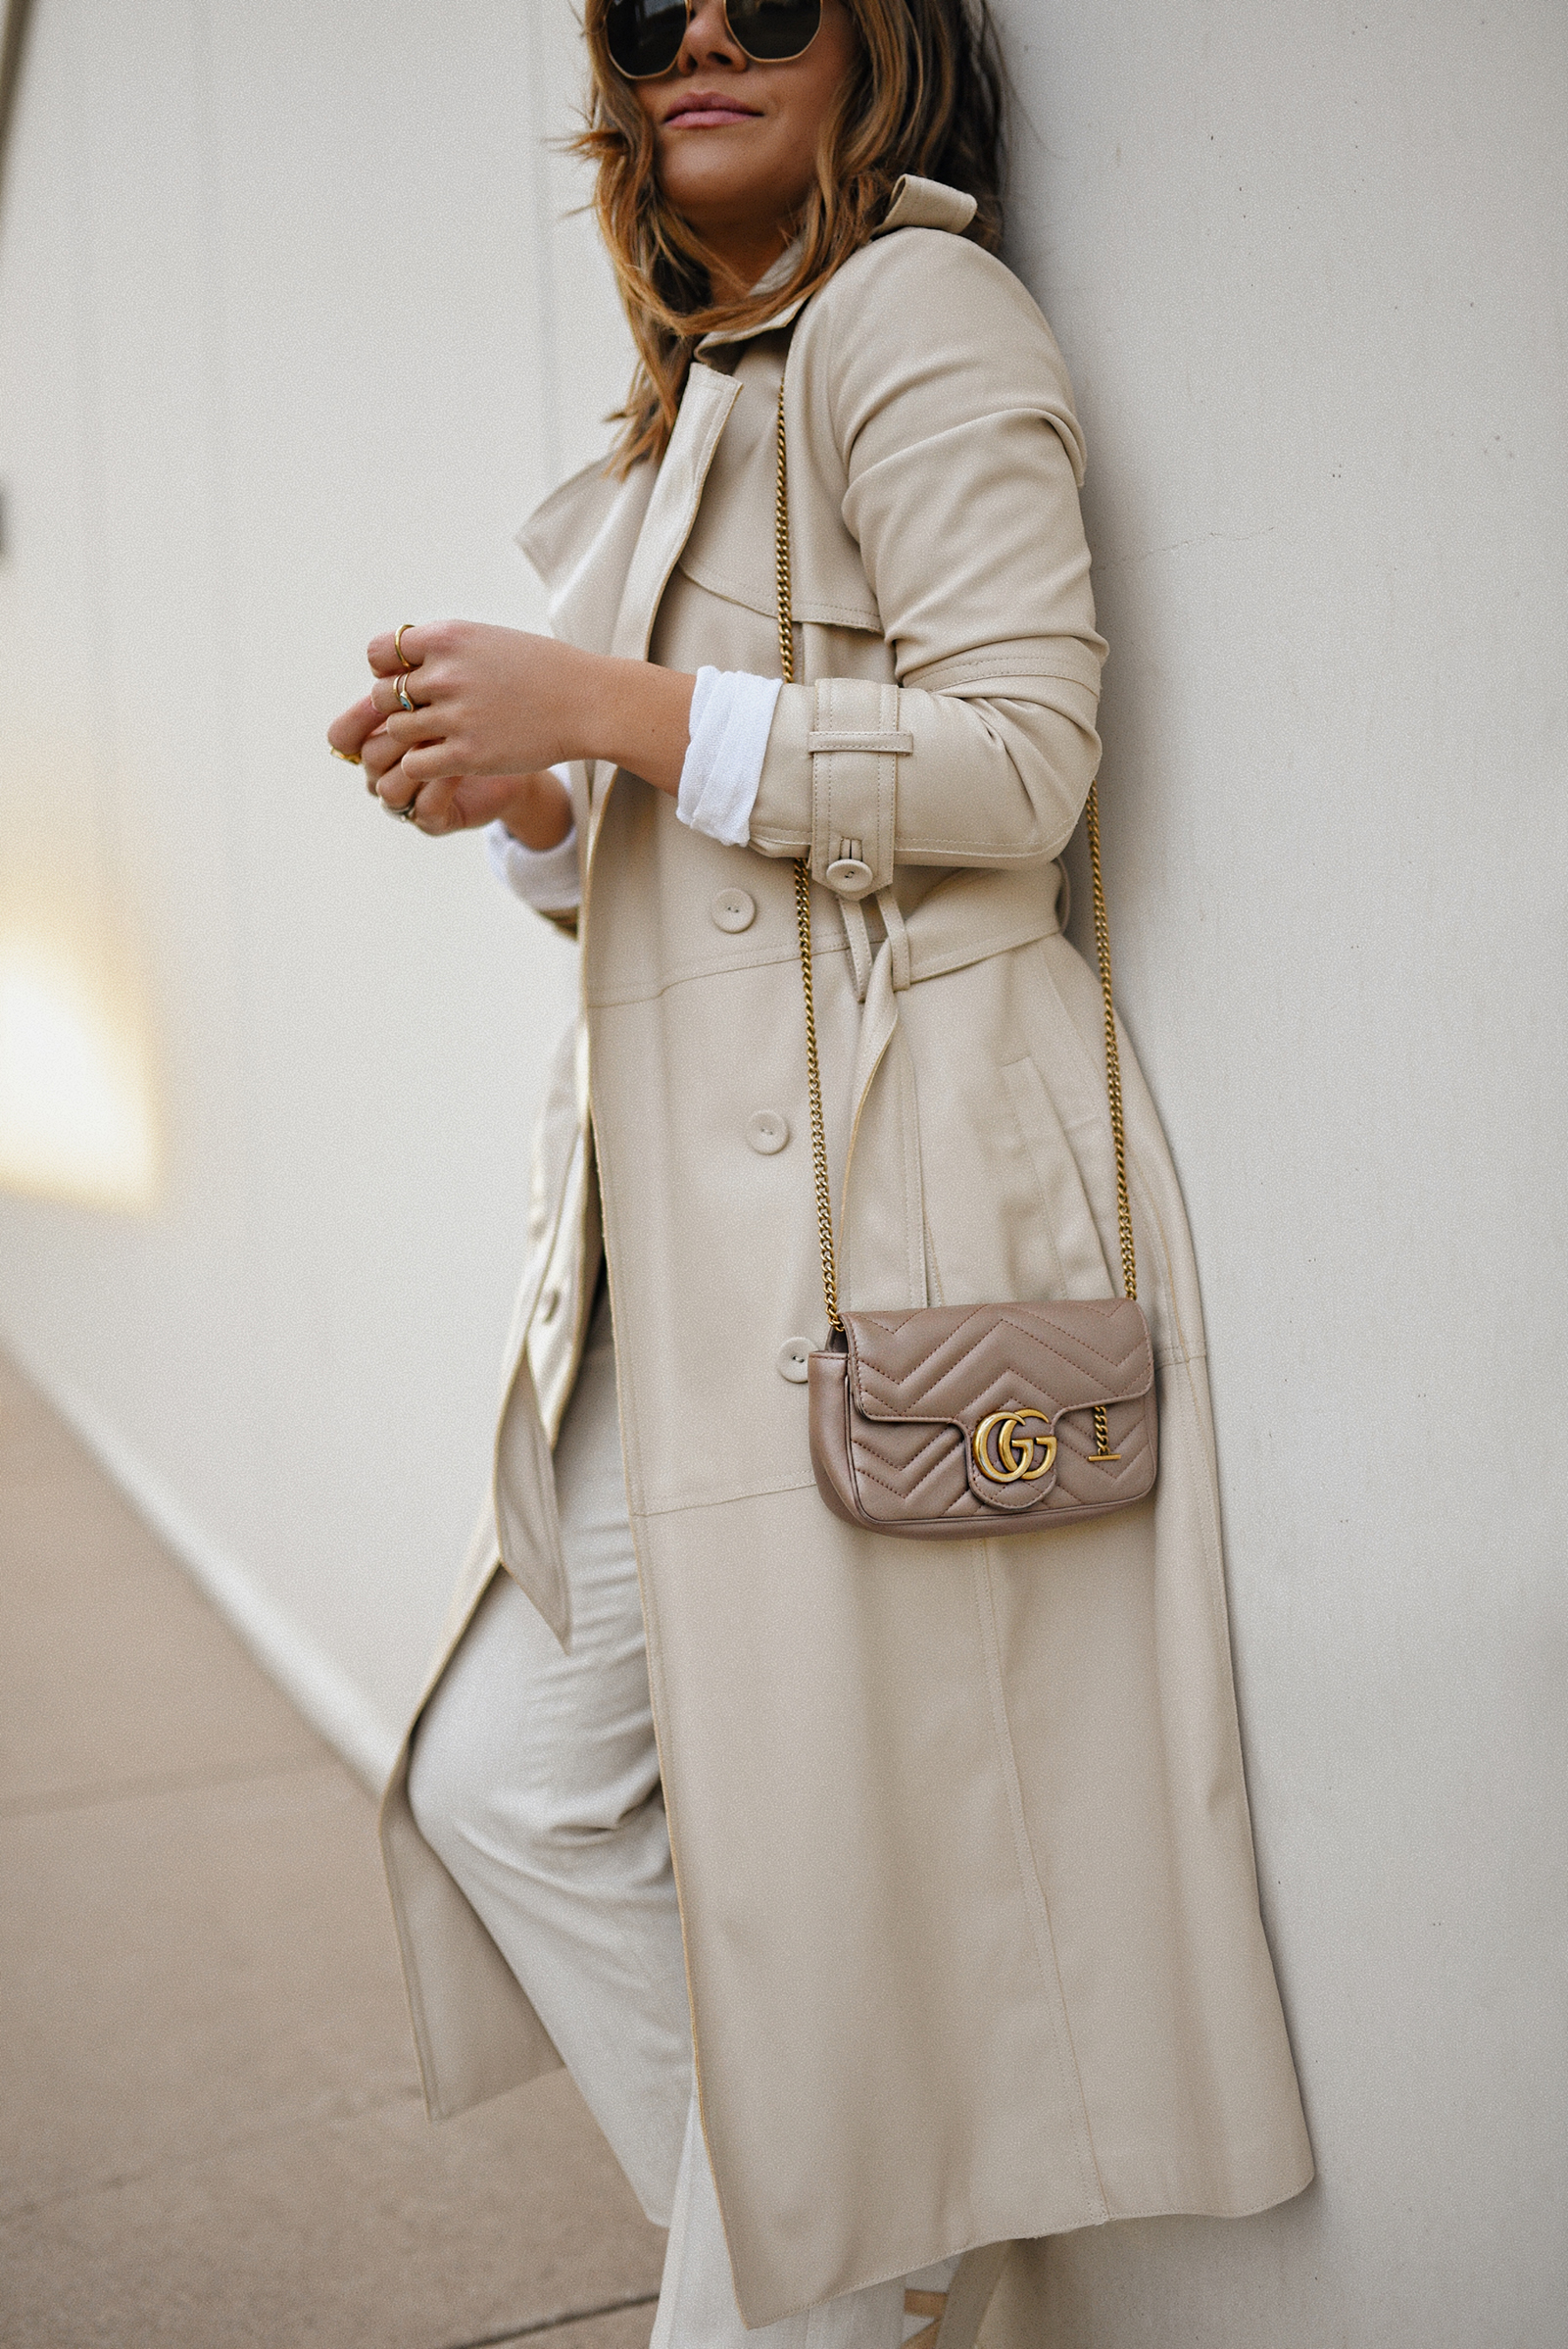 Carolina Hellal of Chic Talk wearing a Karen Millen faux leather trench coat, Michael Stars long sleeve white top, Uniqlo beige trousers and Veja sneakers. 